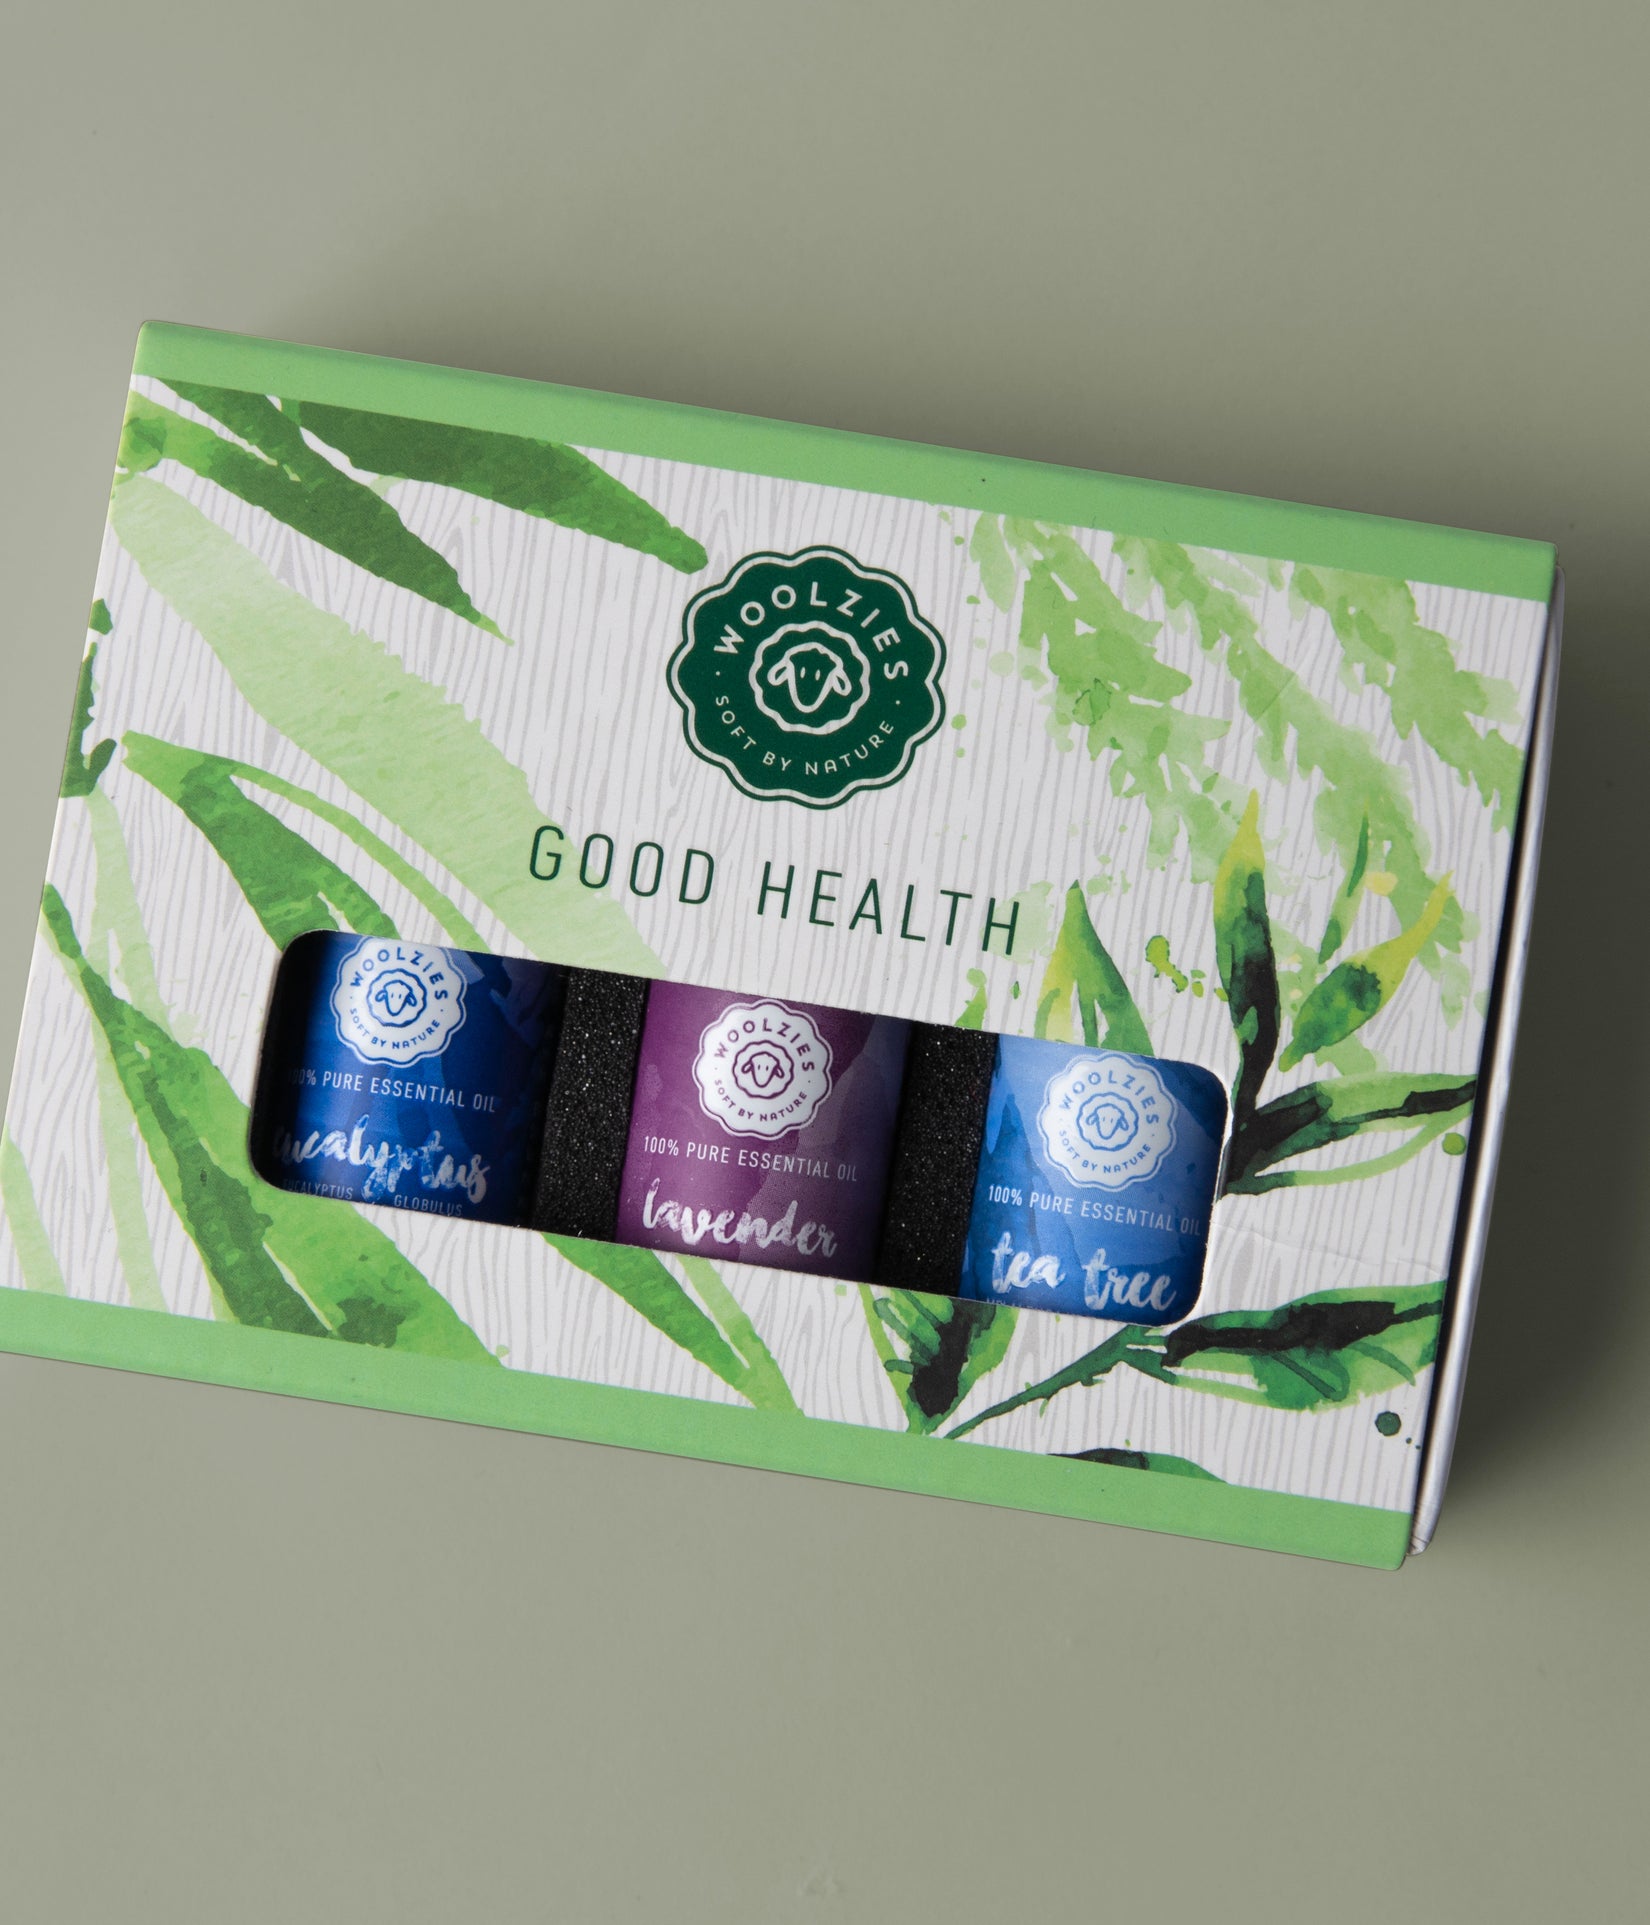 The Good Health Collection